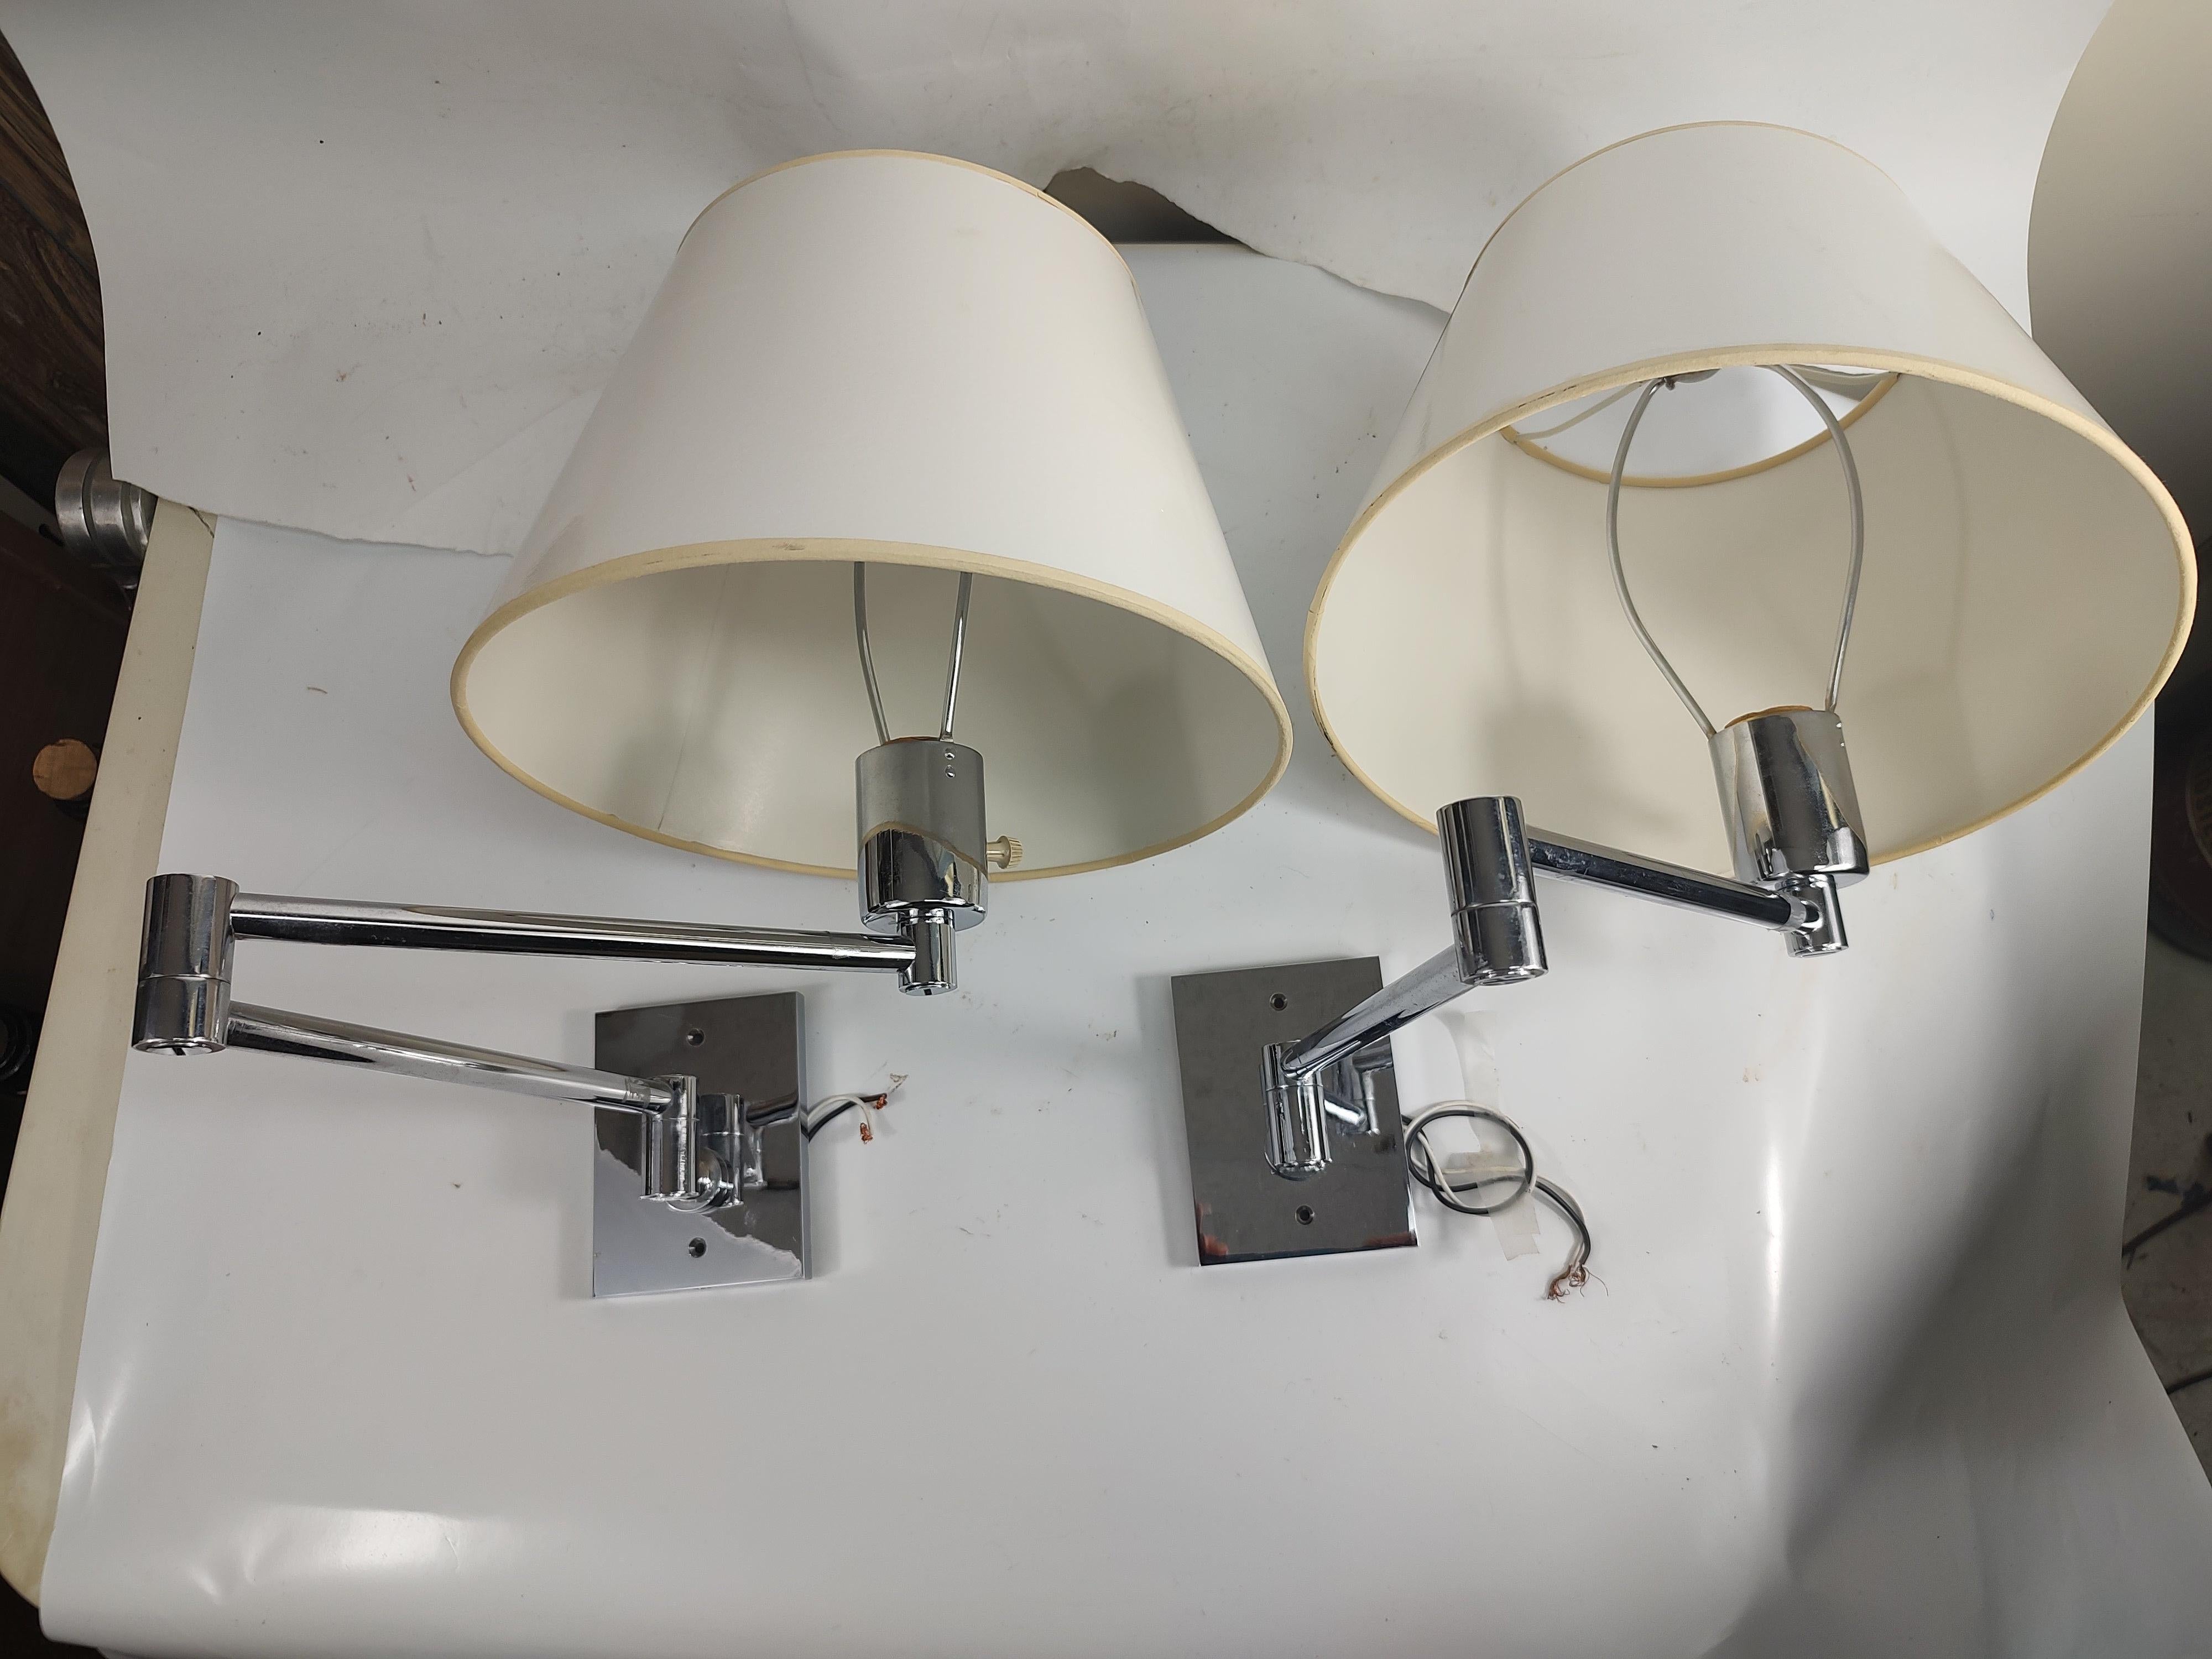 Fantastic pair of high quality chrome swing arm wall sconces by the Hansen Lighting Co, made in Spain c1965. Includes original lacquered paper shades and not original pair of acorn finials. Priced and sold as a pair. In excellent vintage condition